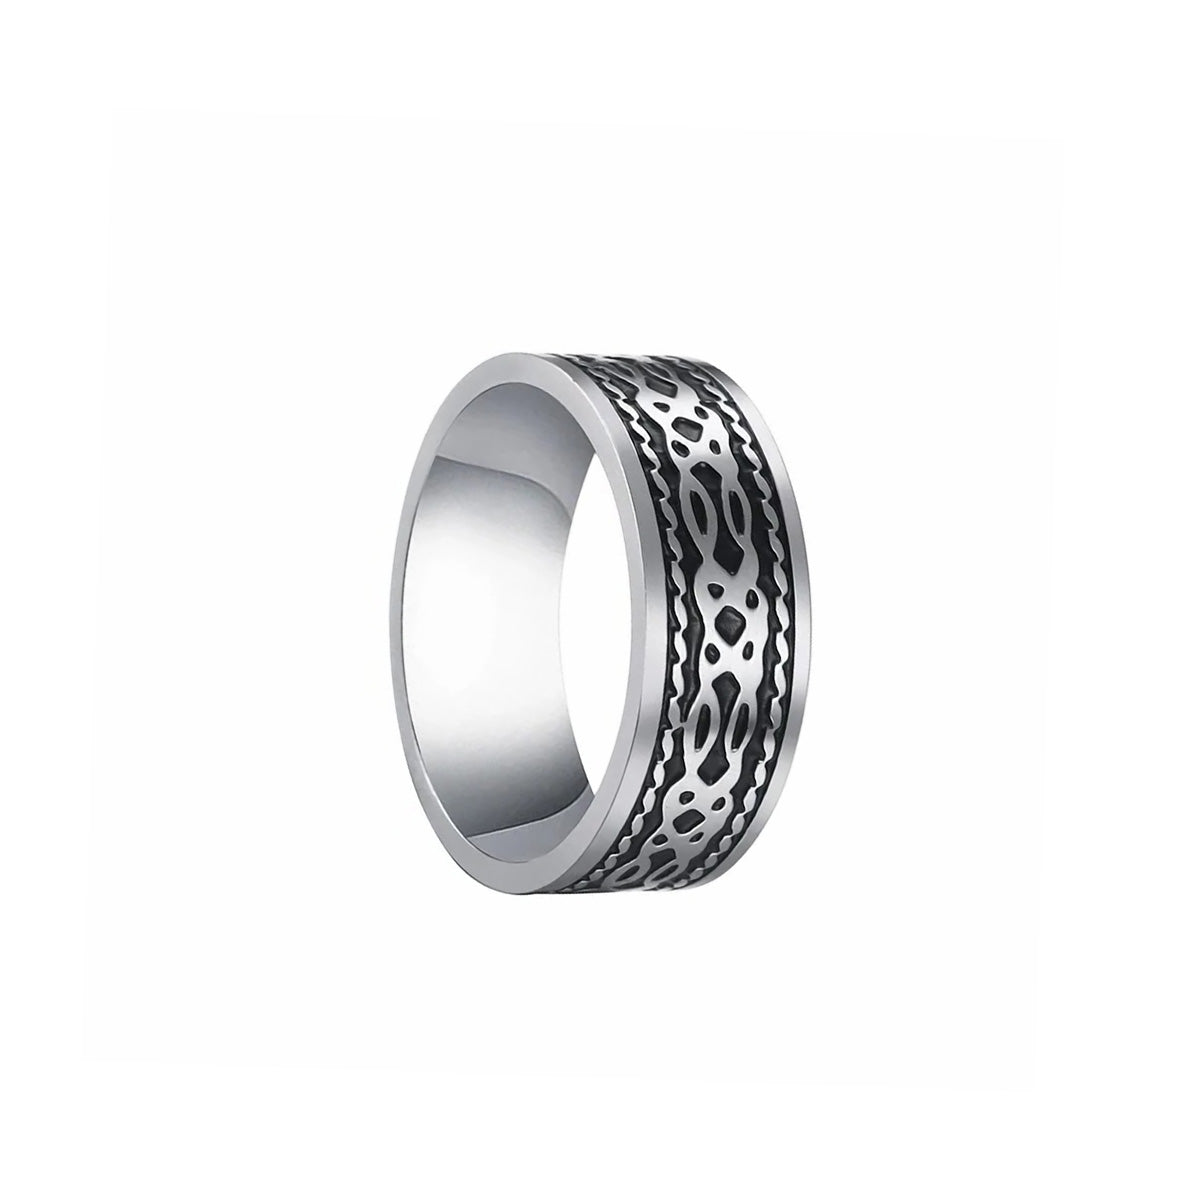 Patterned shiny steel ring 8mm